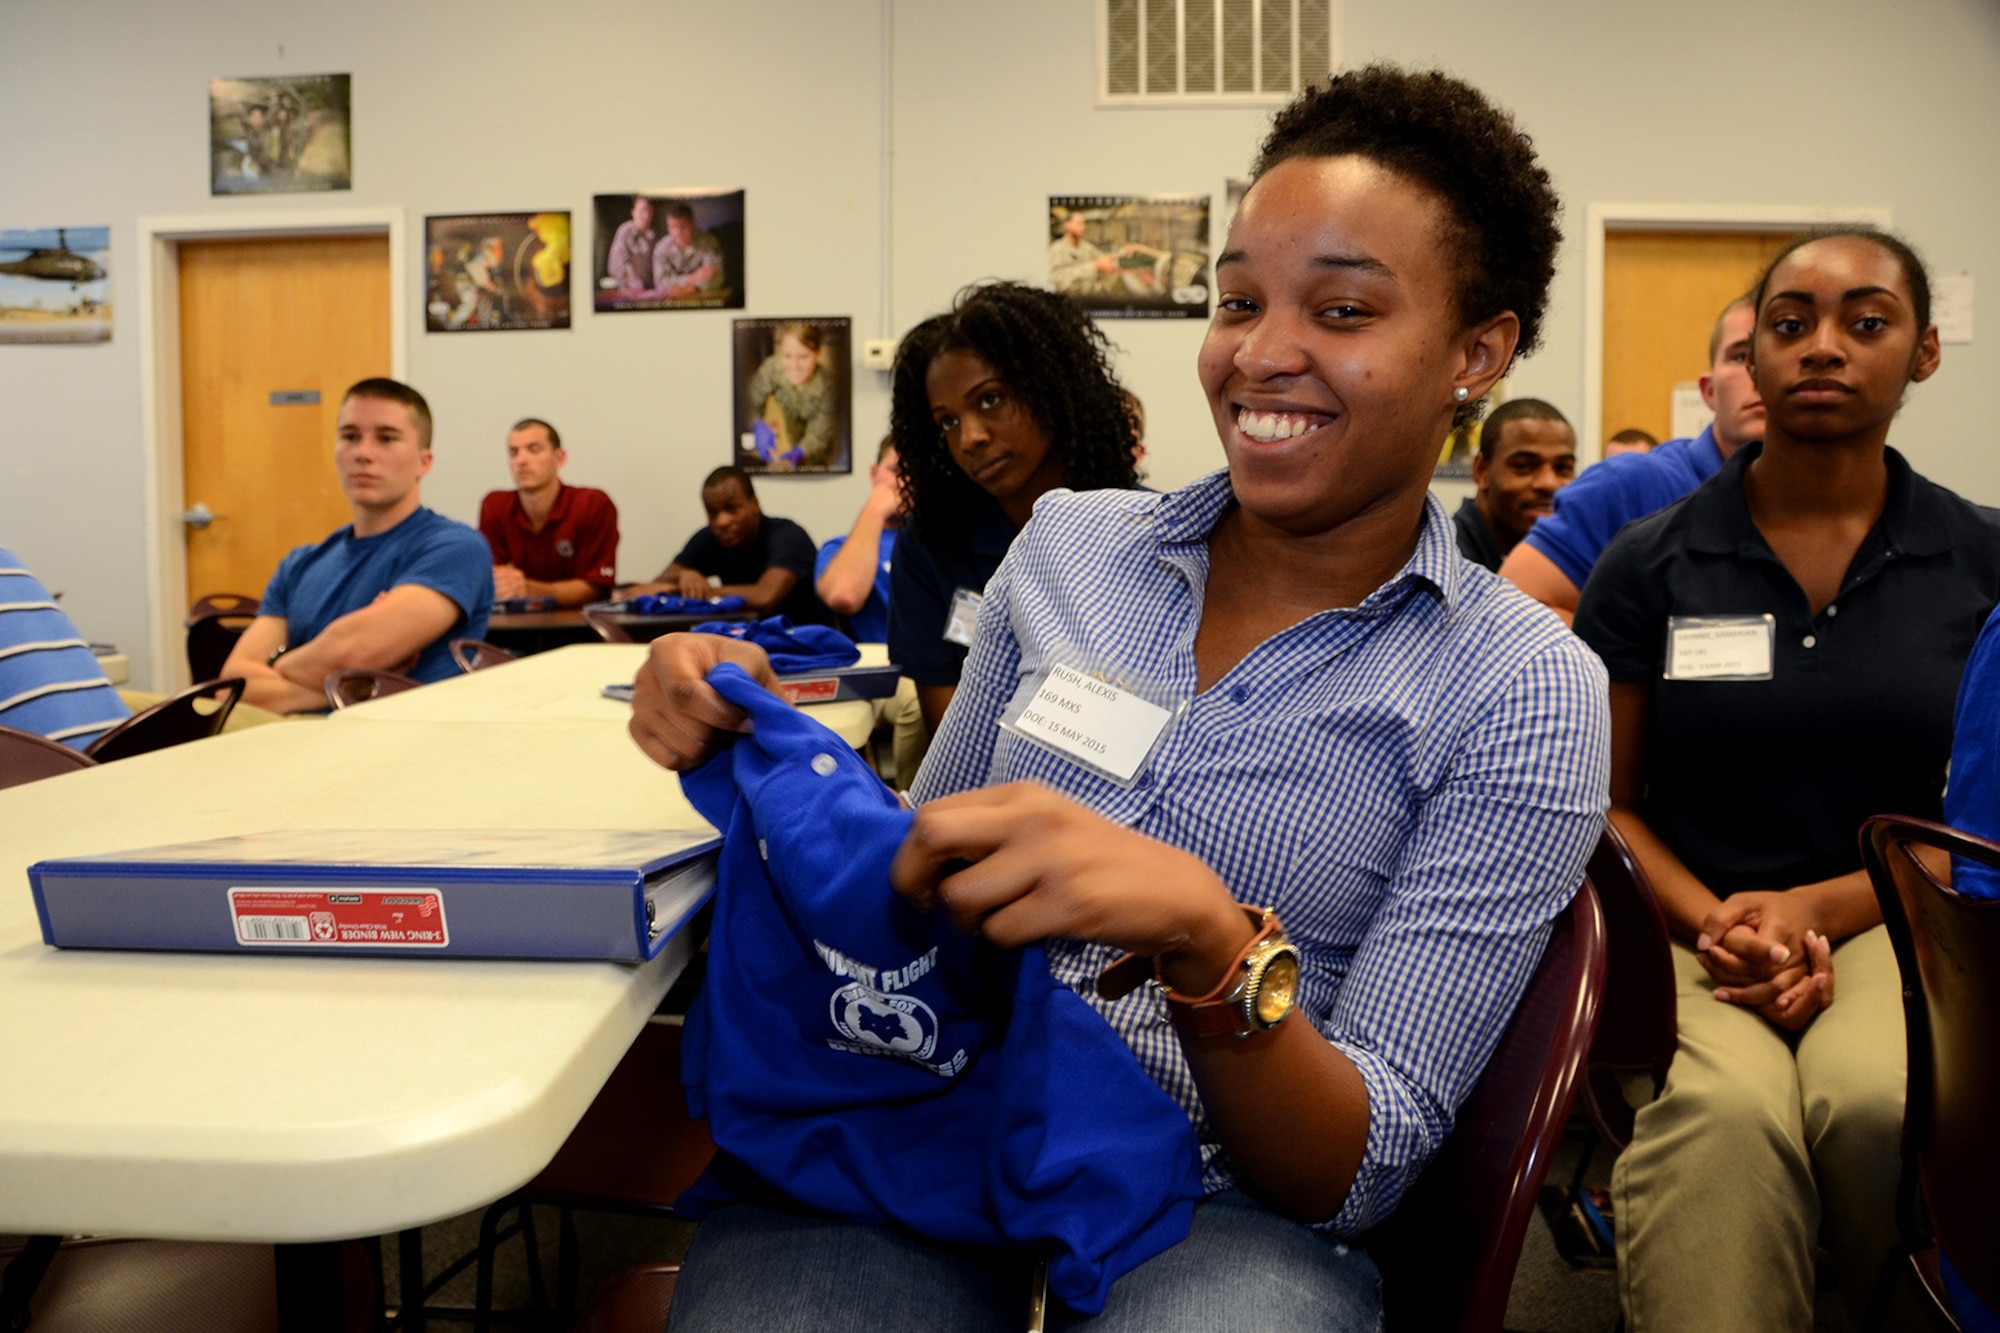 U.S. Air Force Airman Alexis Rush, assigned to the 169th Student Flight, holds up her Student Flight shirt at McEntire Joint National Guard Base, S.C., June 13, 2015. The trainees received shirts and binders that include useful information in a ceremony to help introduce them into the Swamp Fox family. (U.S. National Guard photo by Amn Megan Floyd/Released)